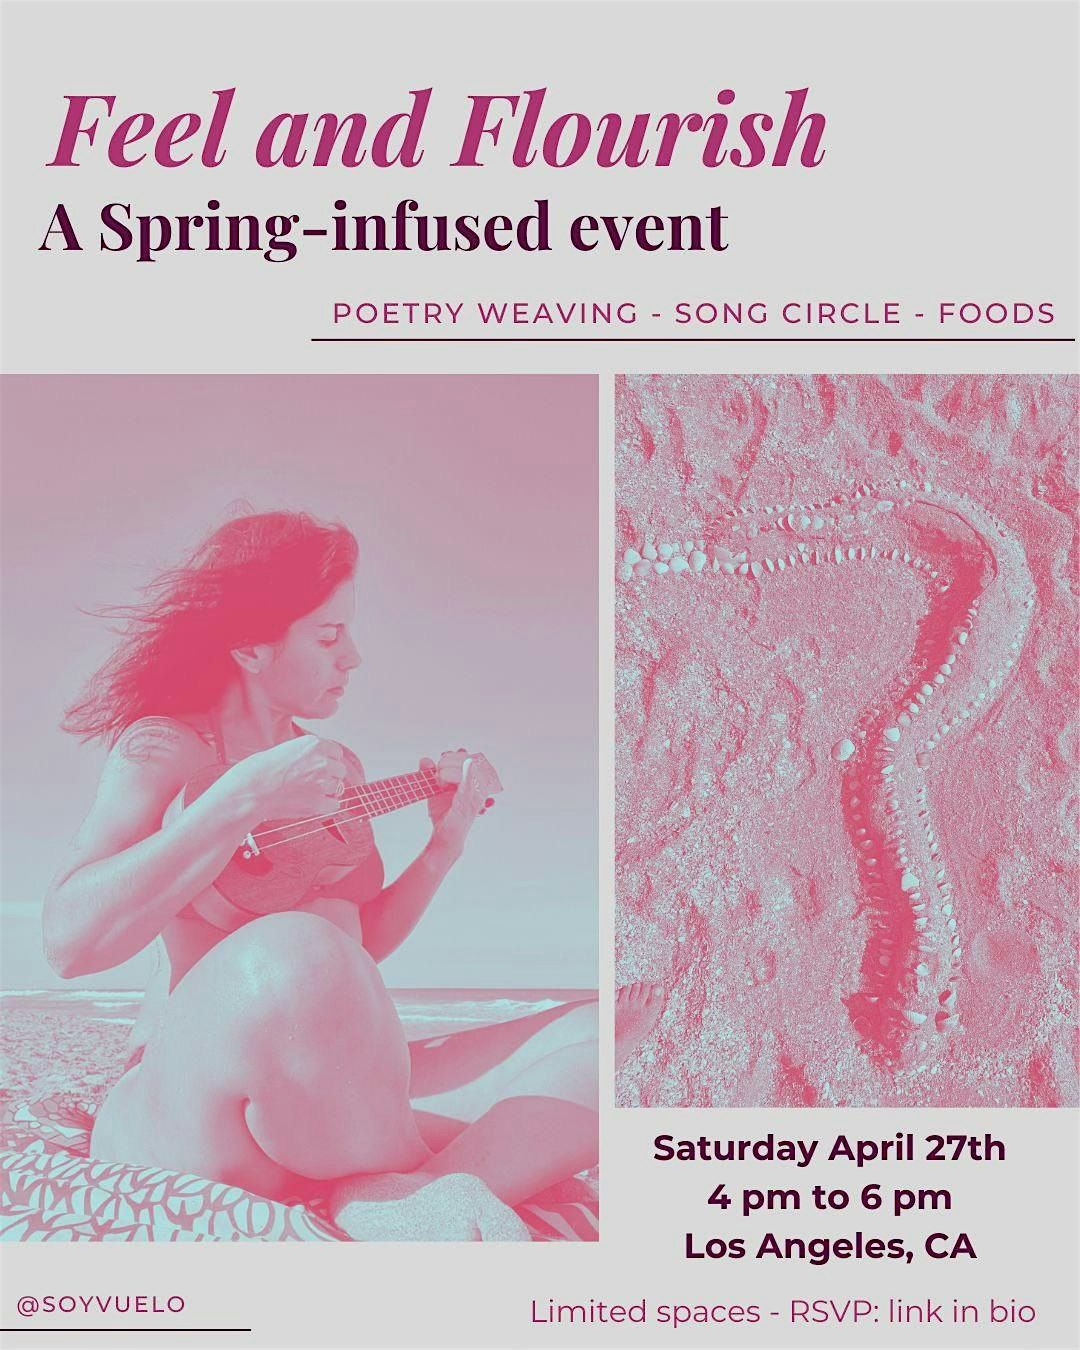 Feel and Flourish - a Spring-infused event in L.A.